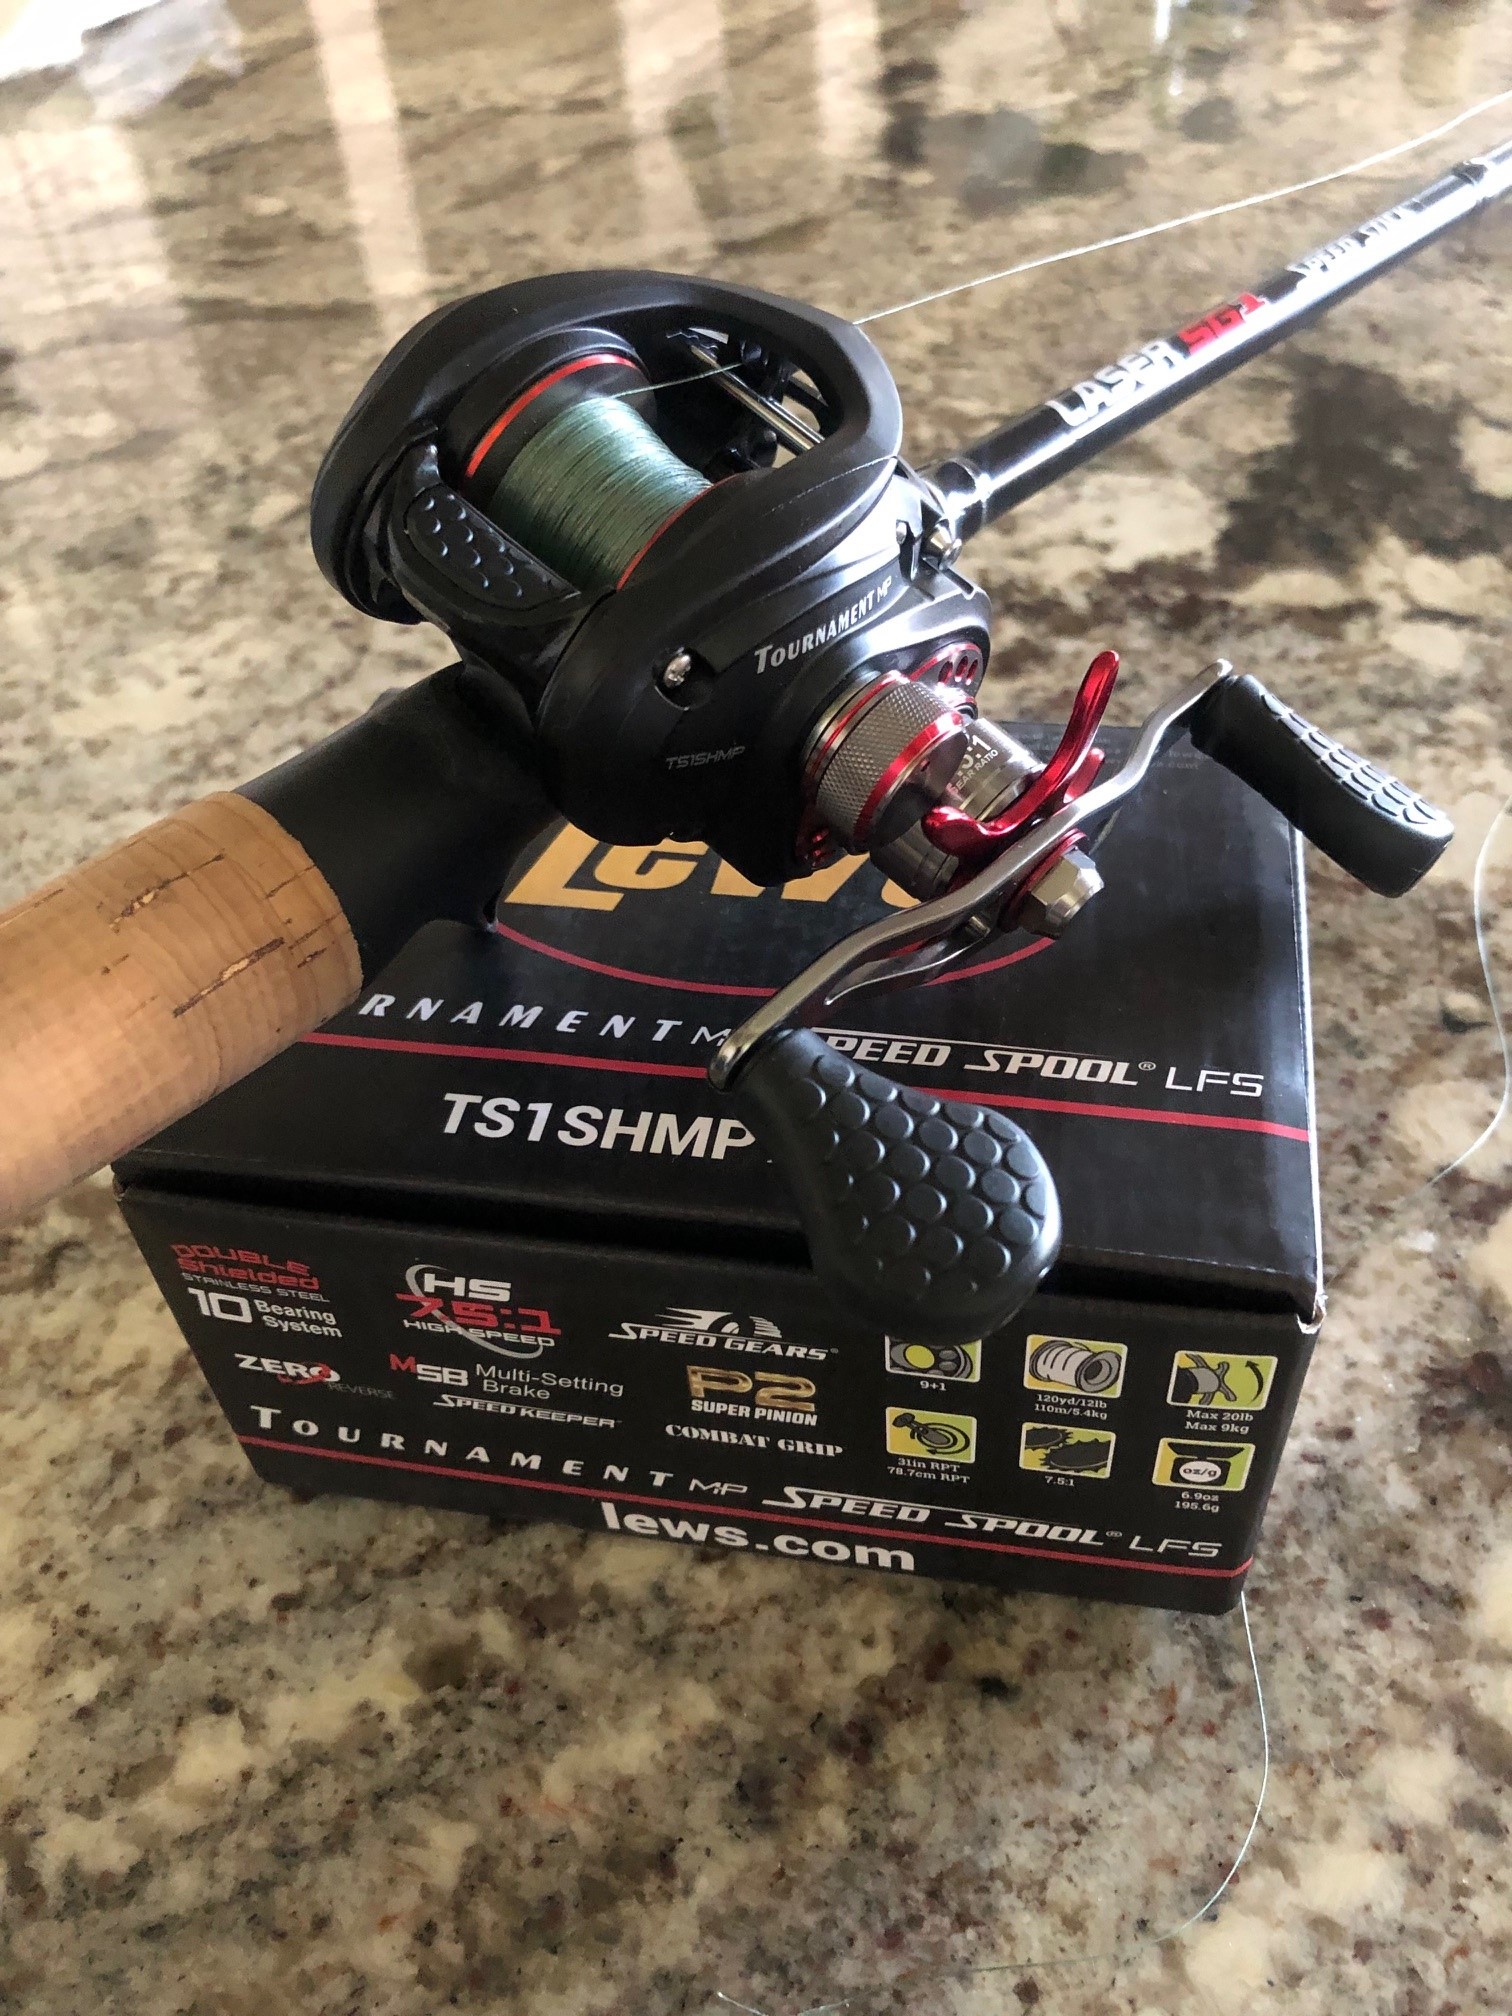 Has anyone used this Daiwa spool before? - Fishing Rods, Reels, Line, and  Knots - Bass Fishing Forums